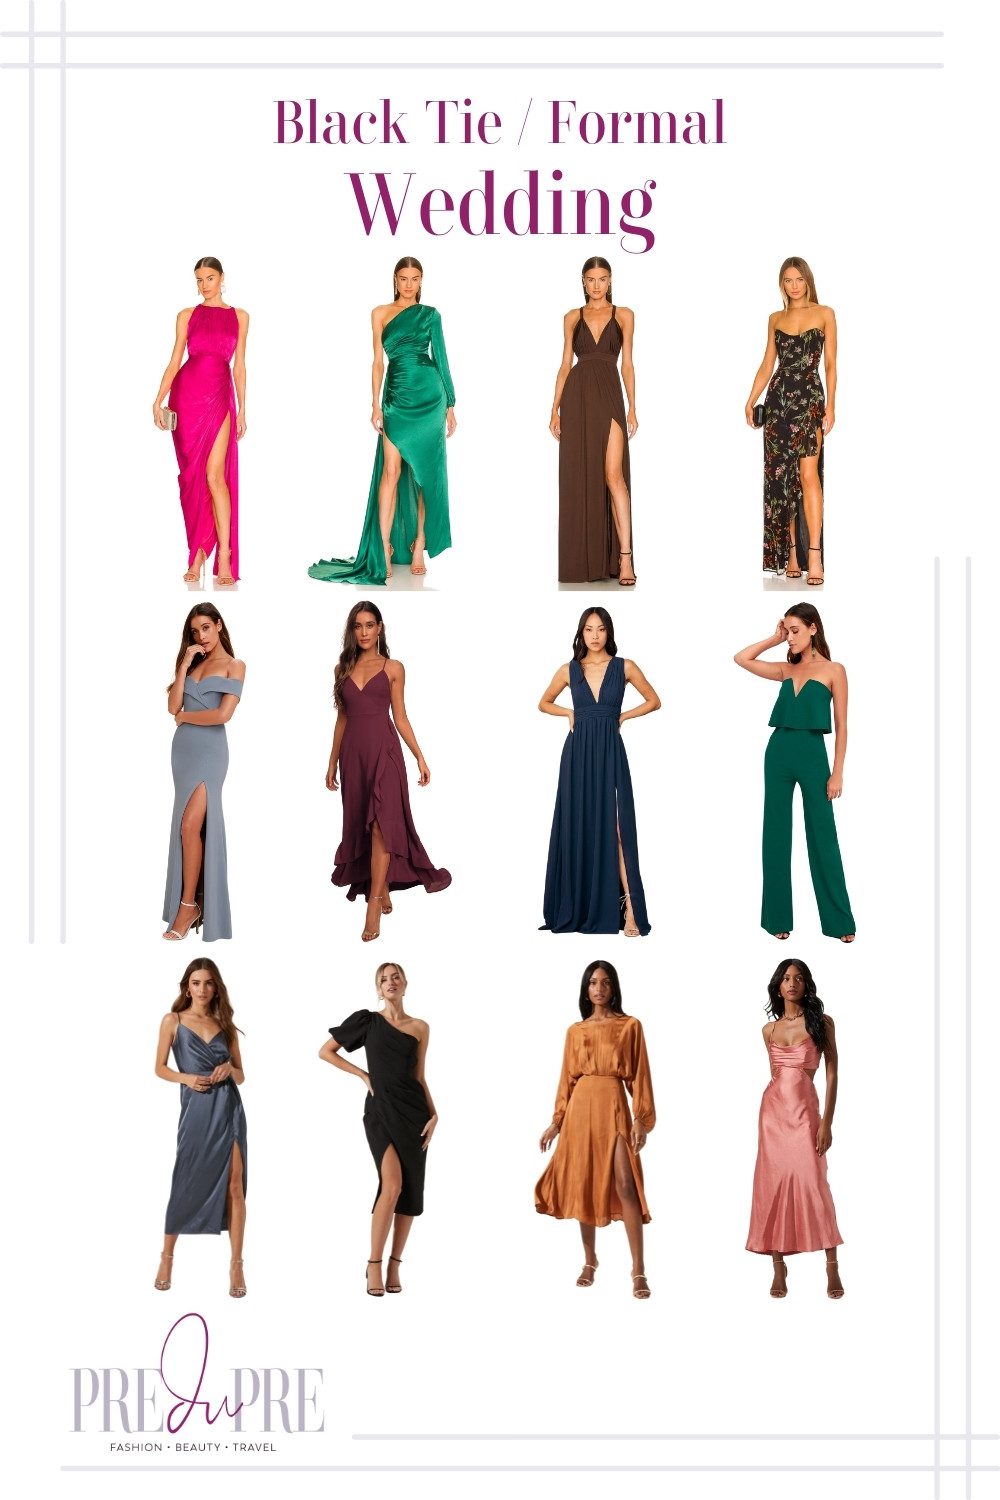 Collage of female outfits to a black tie/formal wedding. Collage features a variety of colorful gowns, jumpsuit, and cocktail dresses.